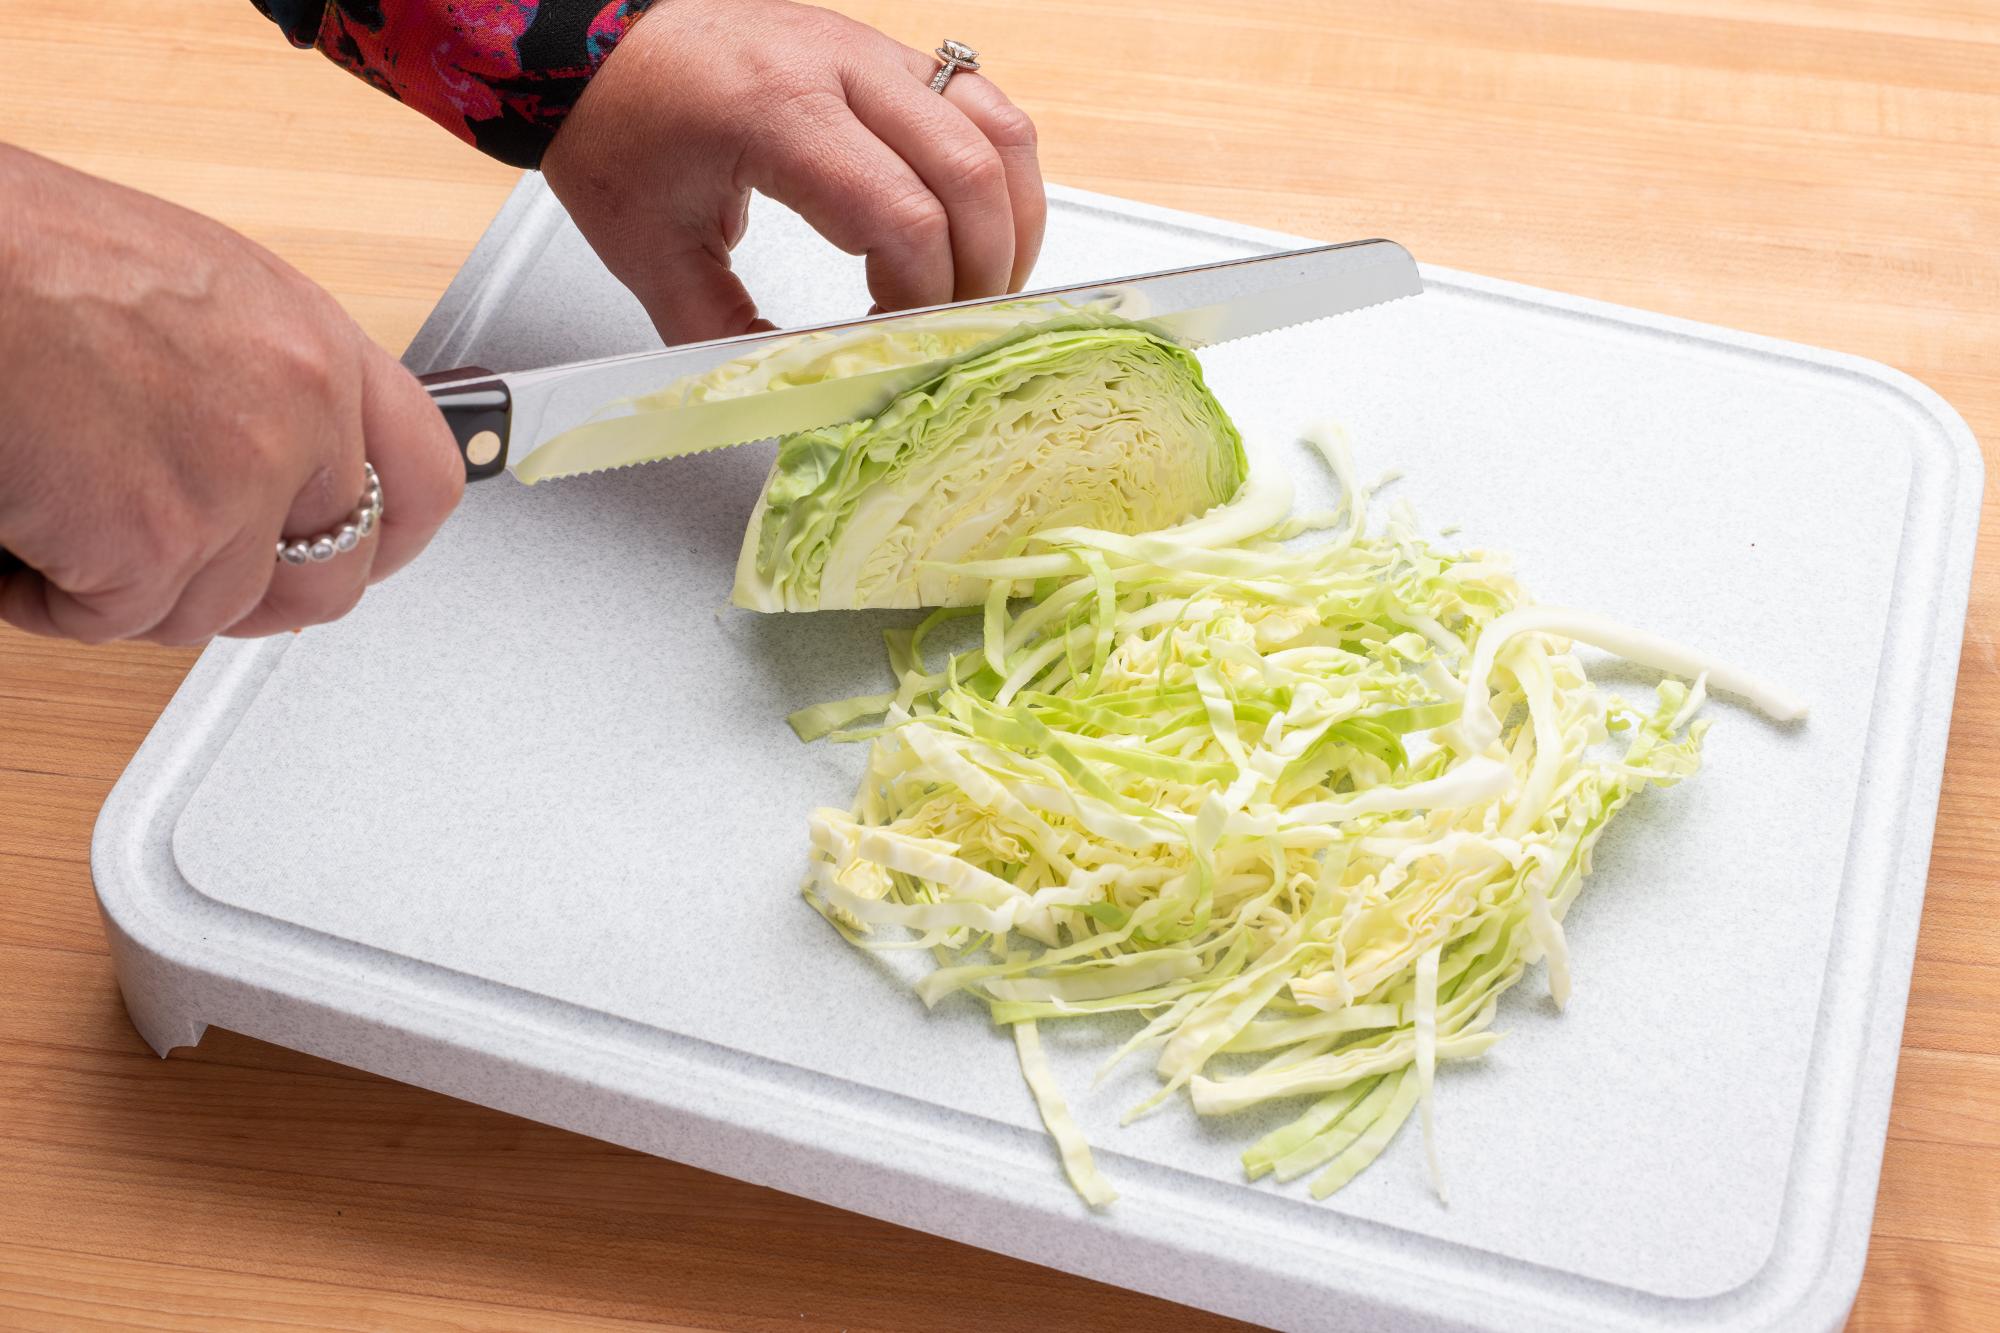 Shredding the cabbage with the Santoku-Style Slicer.